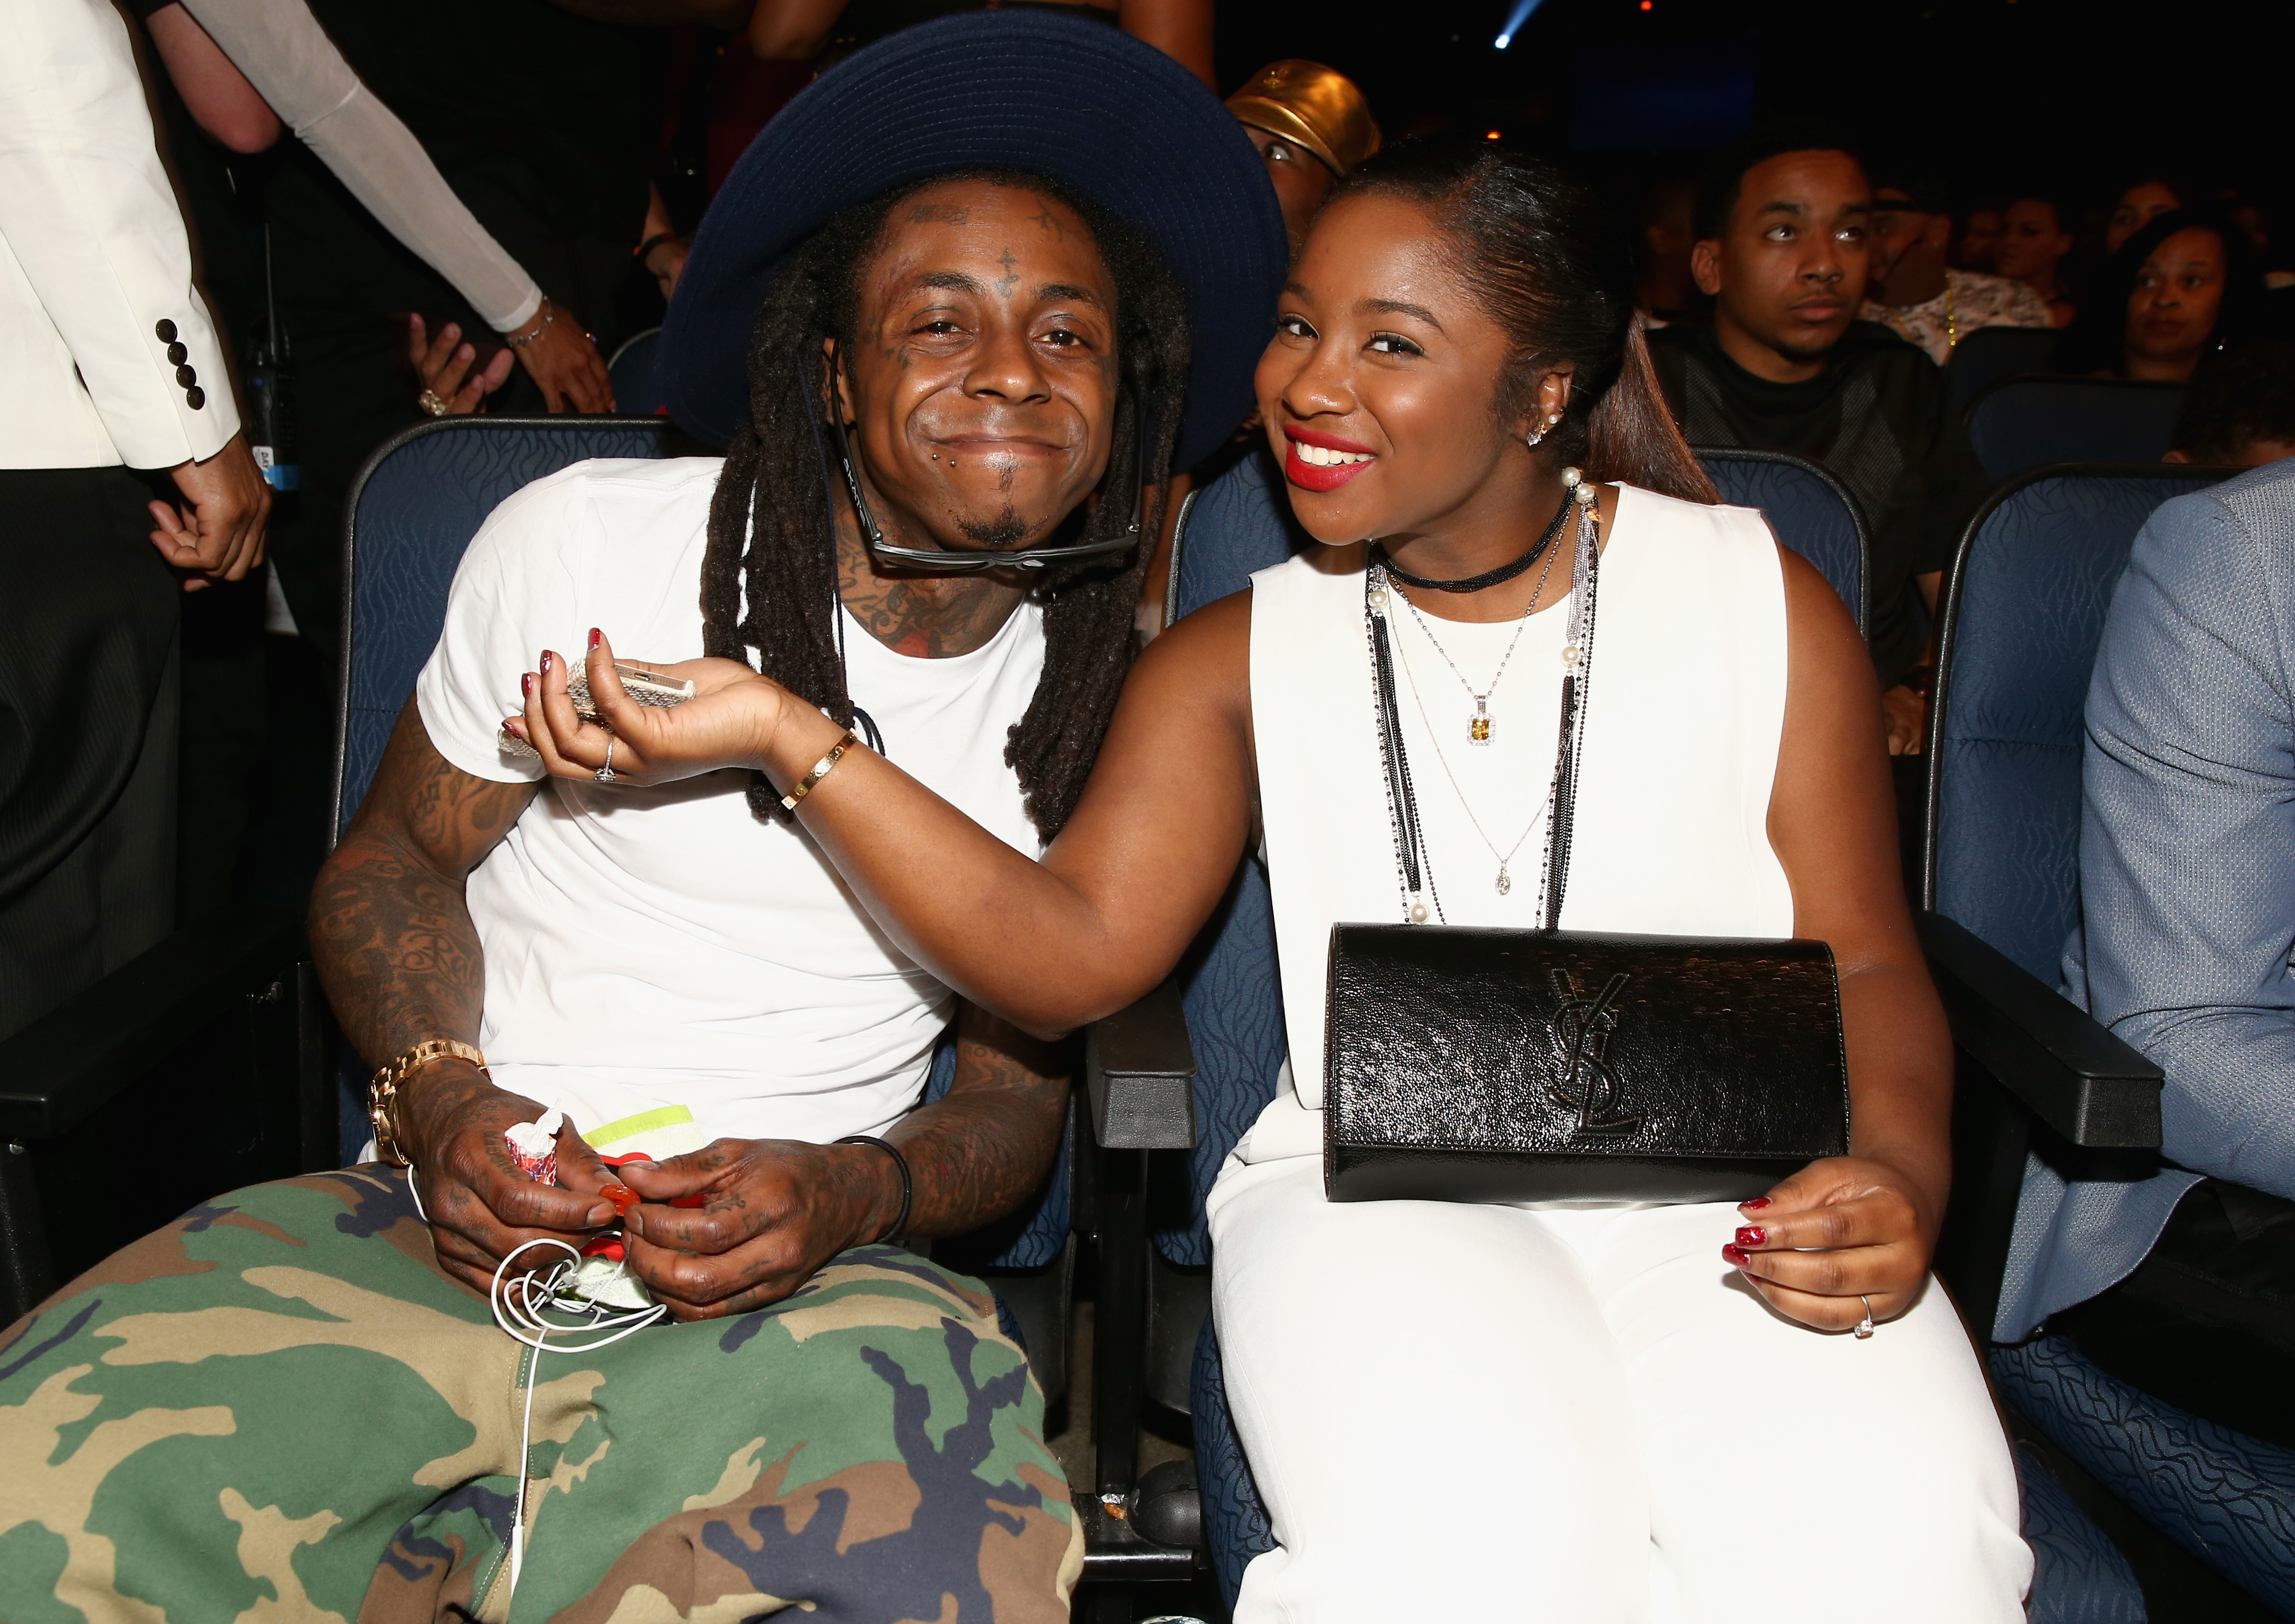 Lil Wayne Reportedly Has a 15-Year-Old Son He Never Knew About